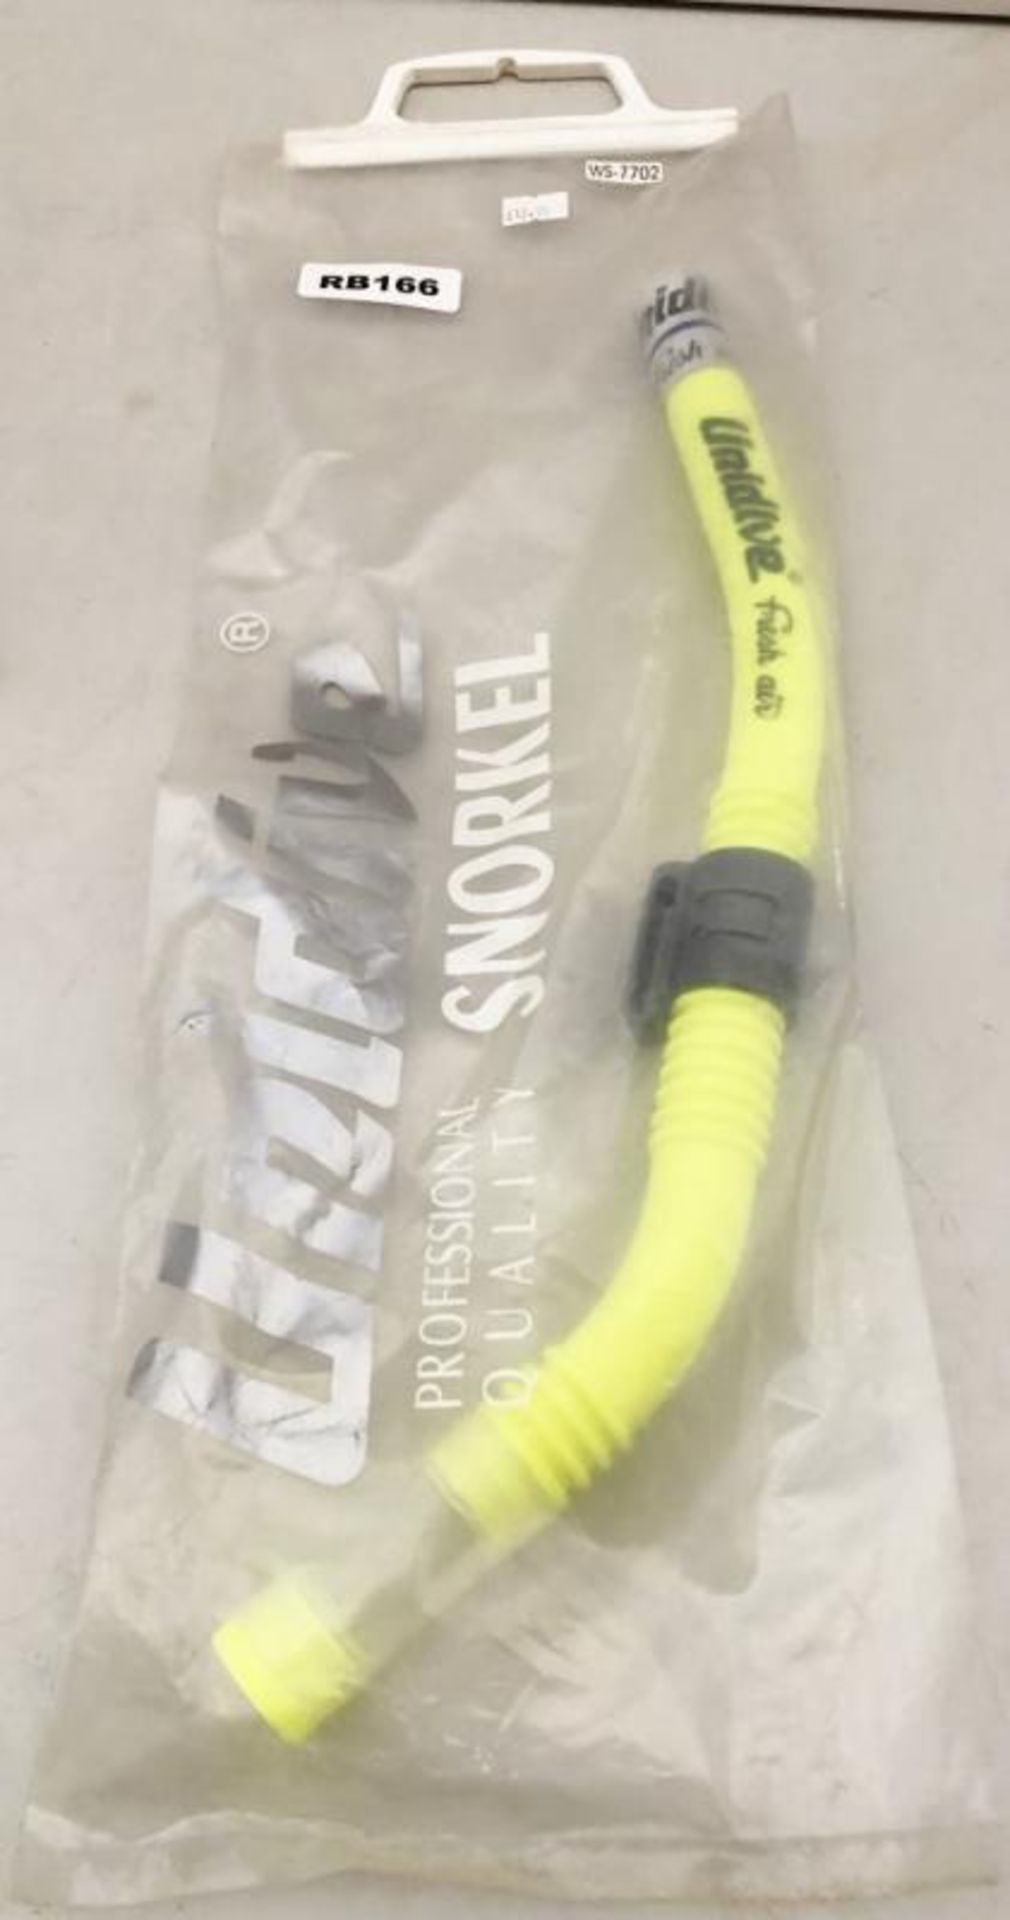 34 x Branded Diving Snorkel's - CL349 - Altrincham WA14 - Brand New! - Image 15 of 30